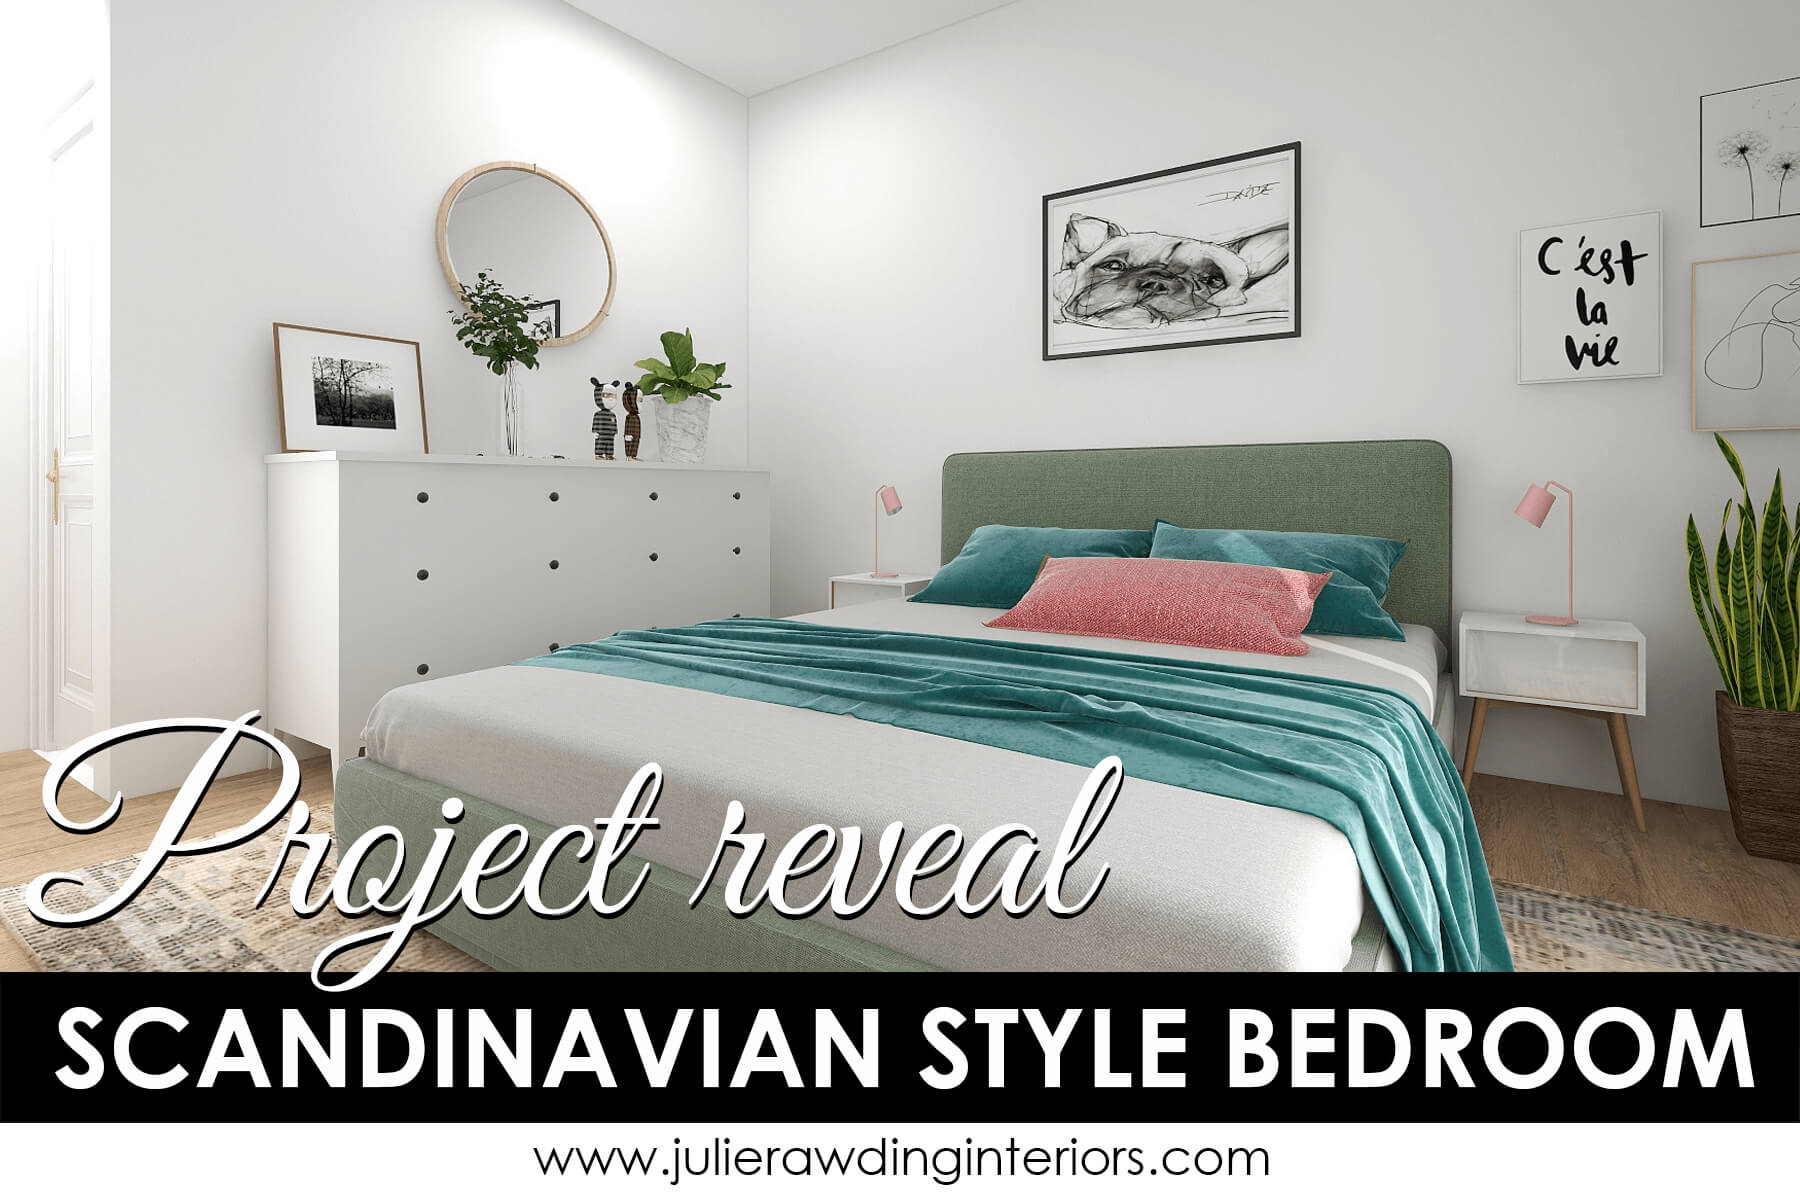 How to create a Scandinavian style bedroom